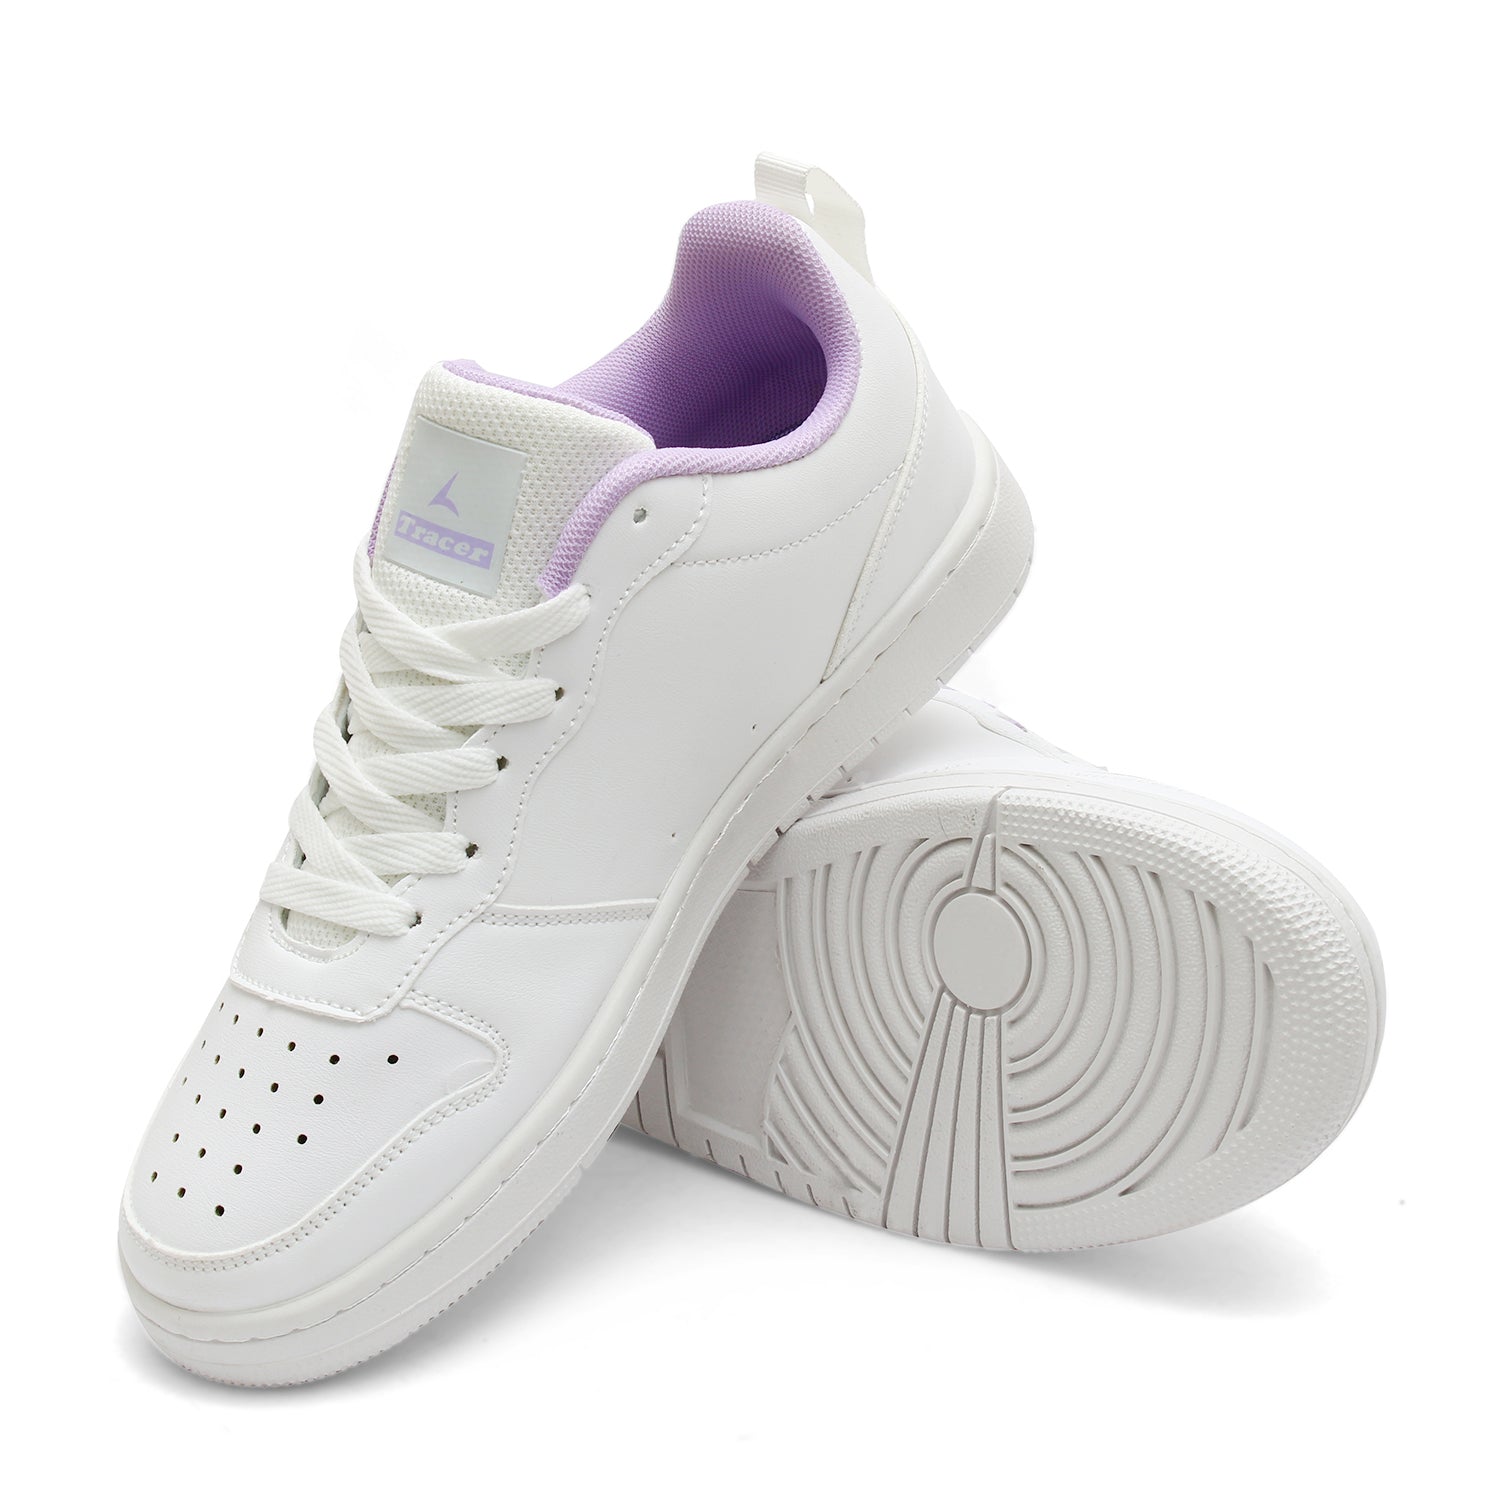 Tracer Shoes Women's Sneakers Lavender